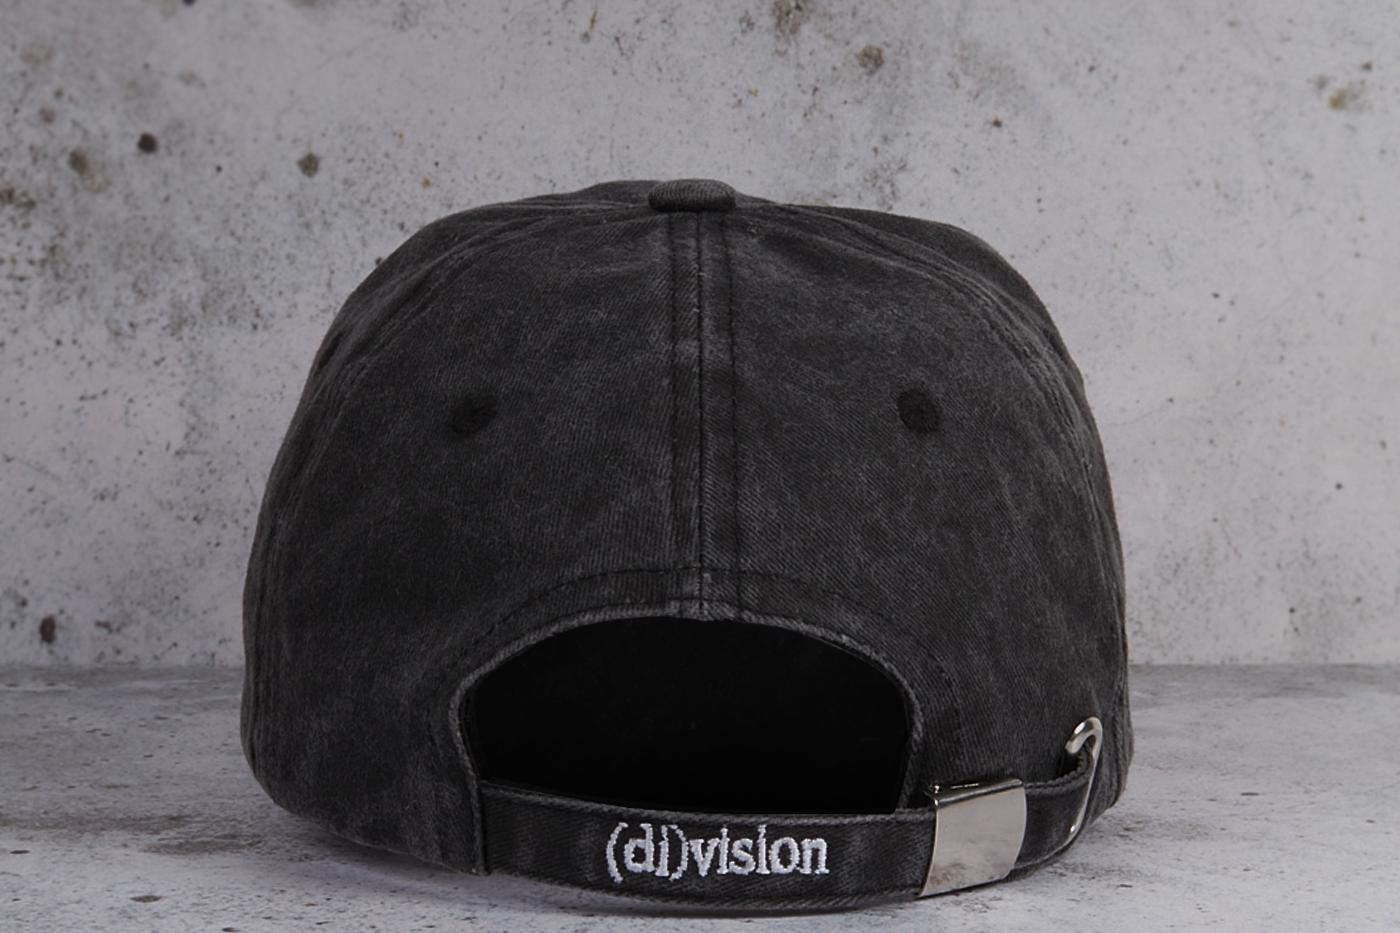 (di)vision | Official Online Store